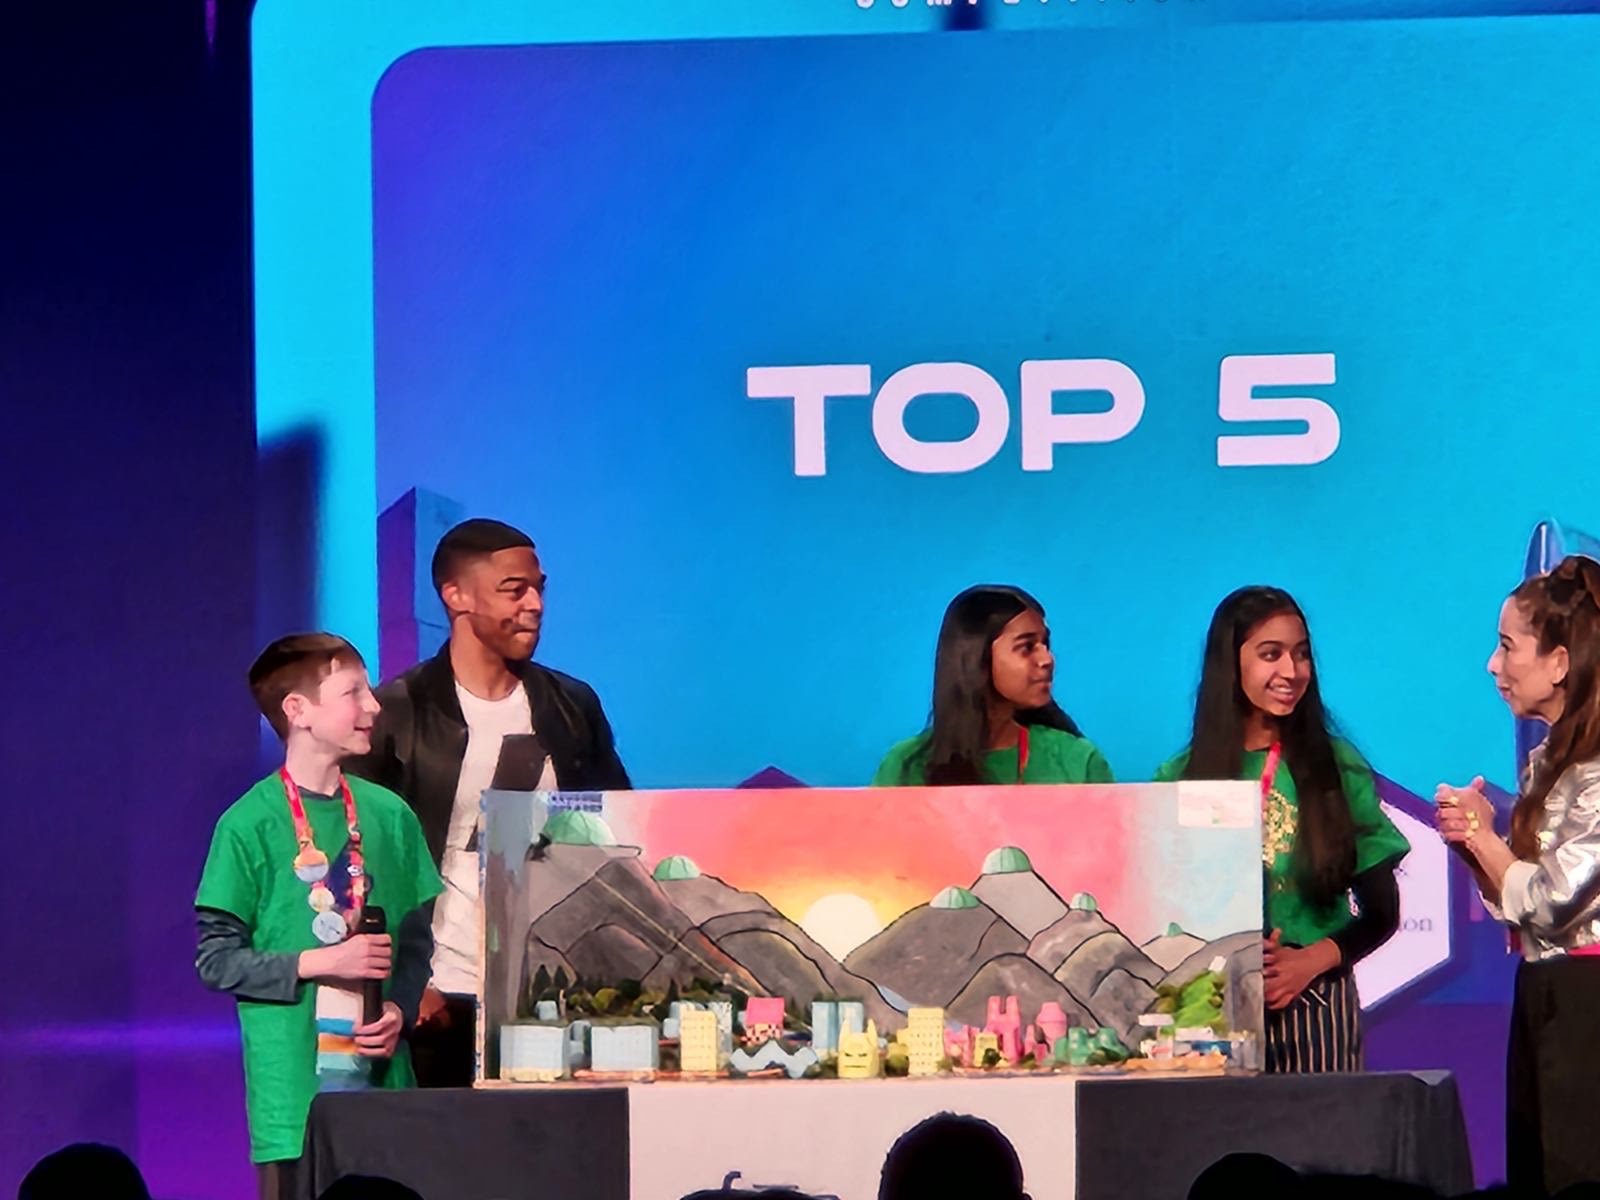 Three students and two adults are on a stage. The backdrop behind them says Top 5. In front of the students is a model of a future city